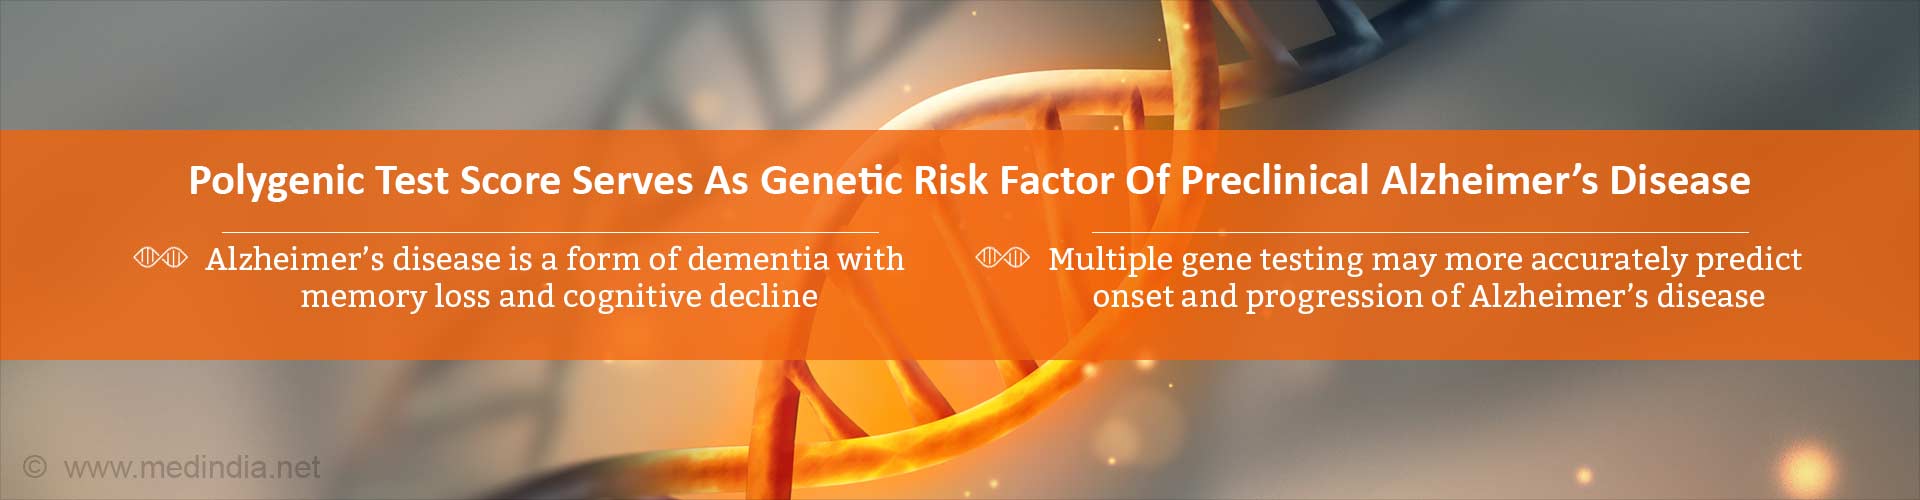 Polygenic test score serves as genetic risk factor of preclinical Alzheimer's disease
- Alzheimer's disease is a form of dementia with memory loss and cognitive decline
- Multiple gene testing may more accurately predict onset and progression of Alzheimer's disease